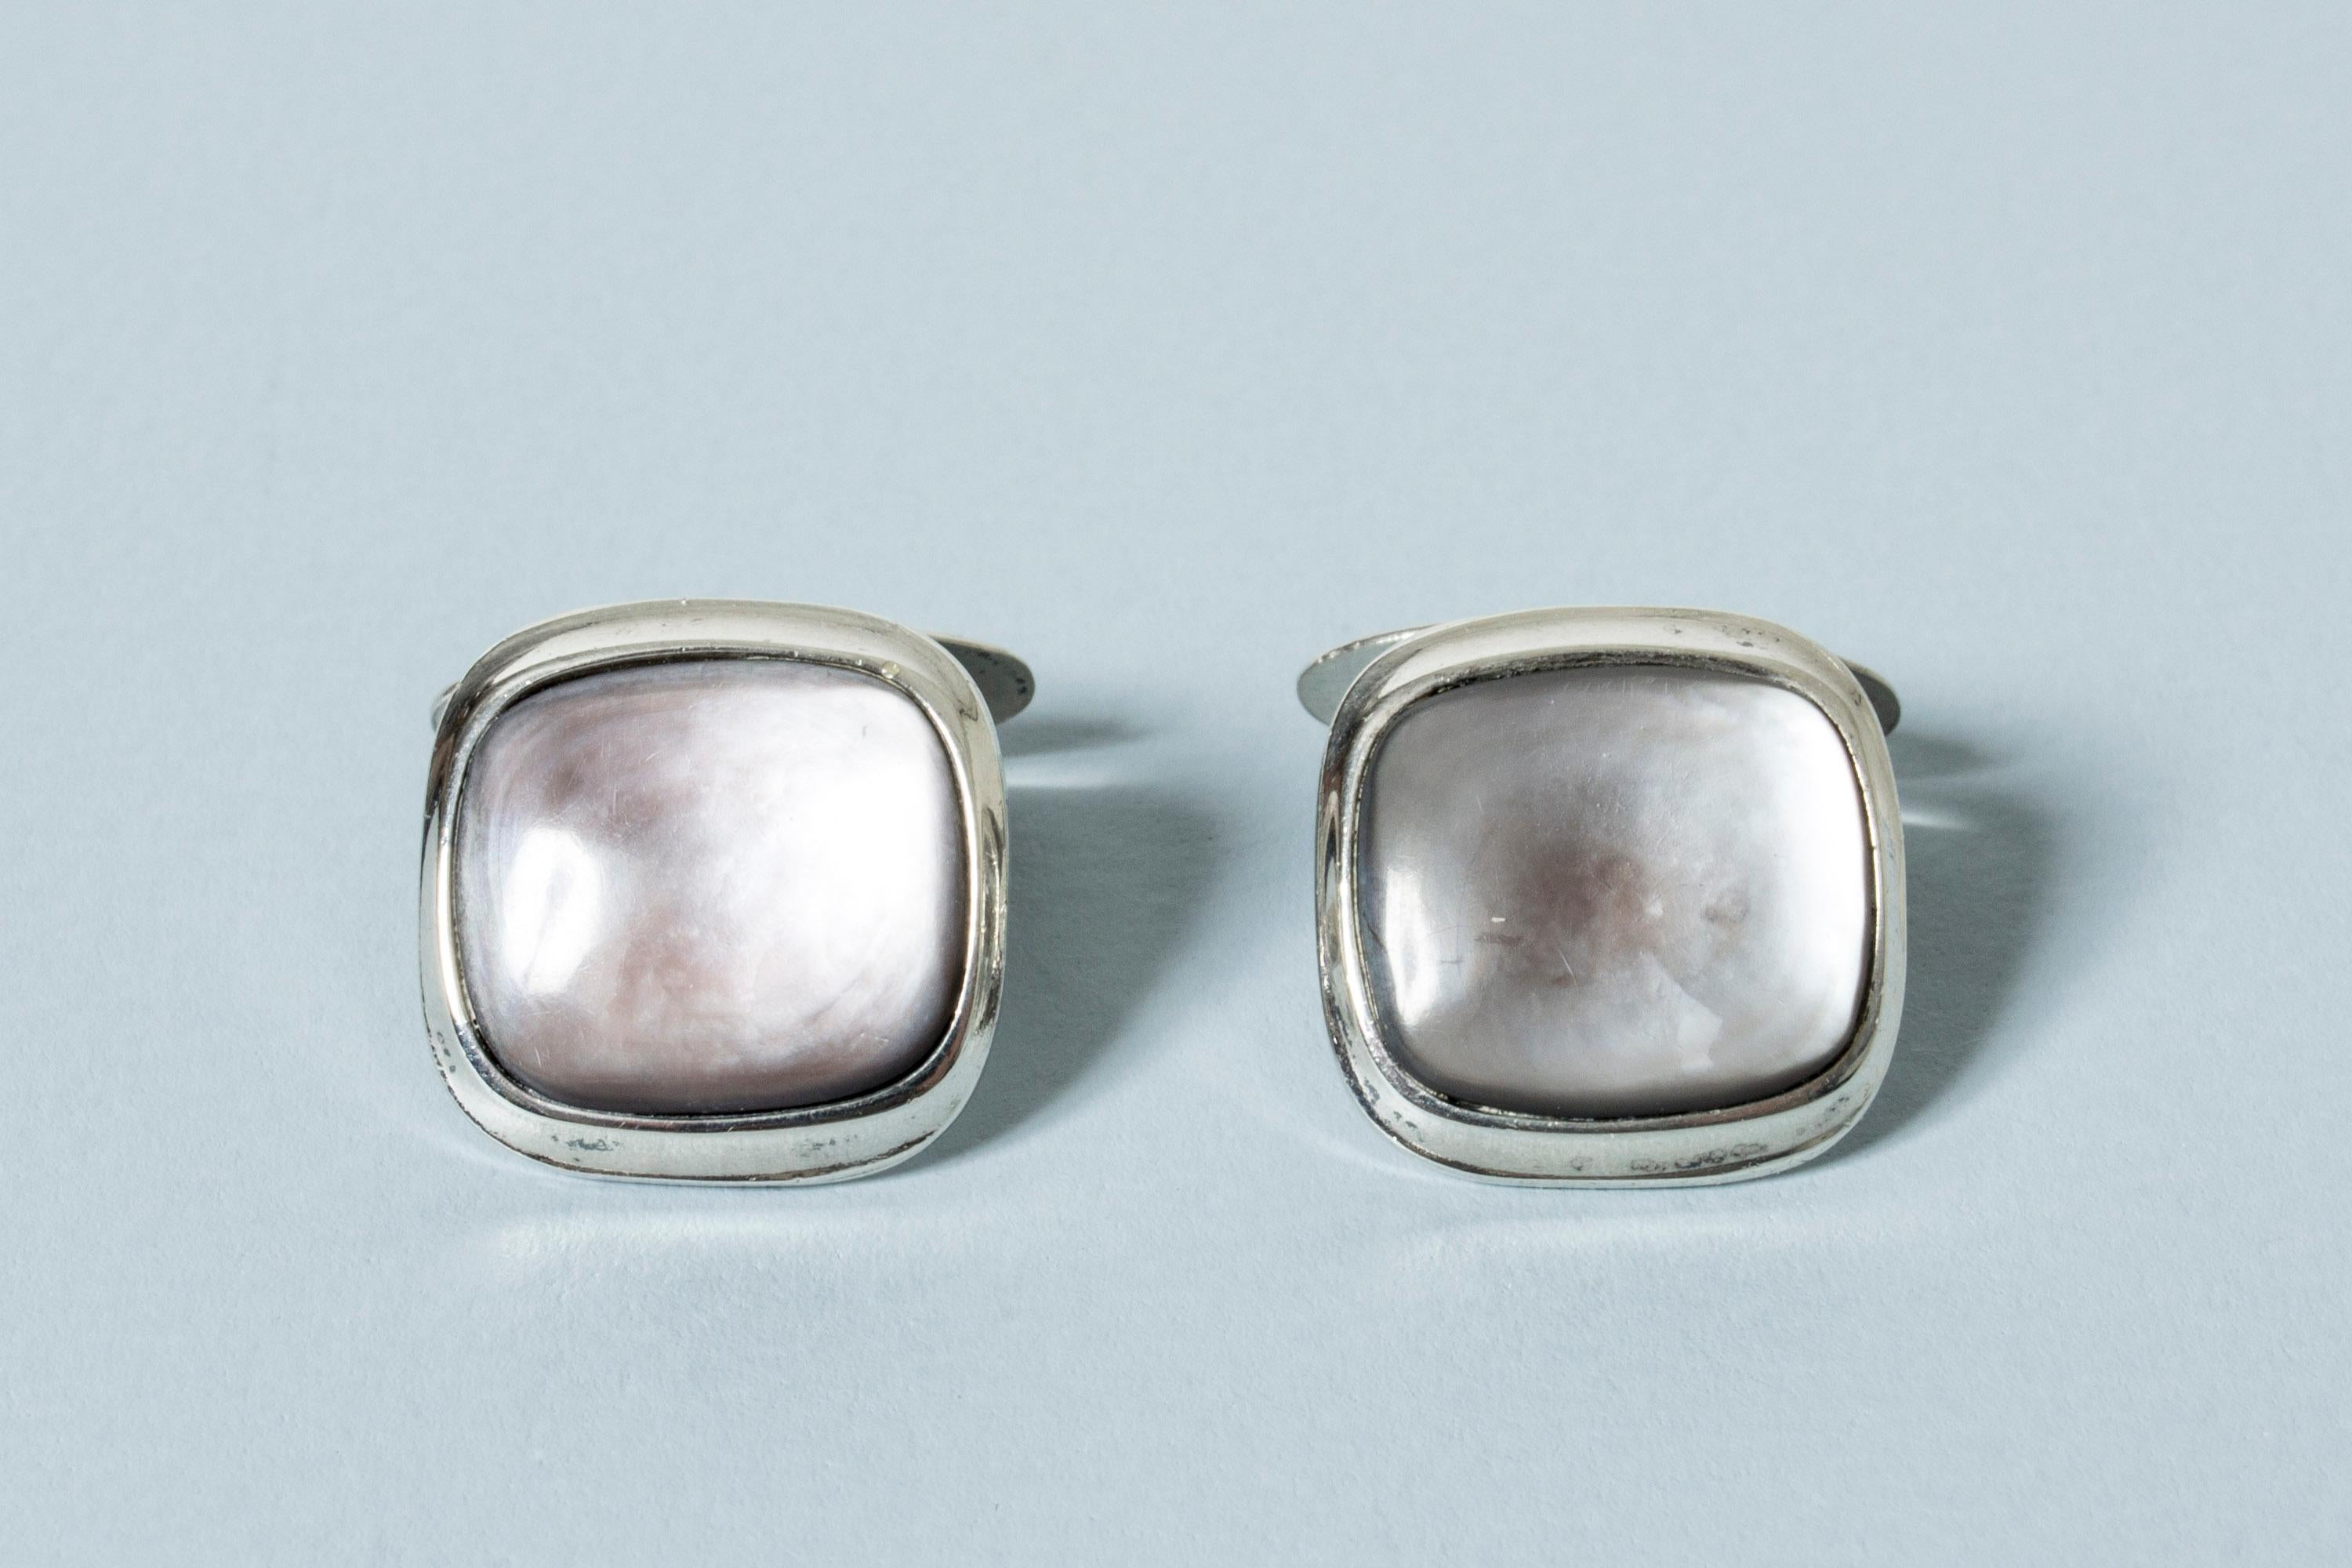 Square Cut Pair of Scandinavian Midcentury Silver and Moonstone Cufflinks